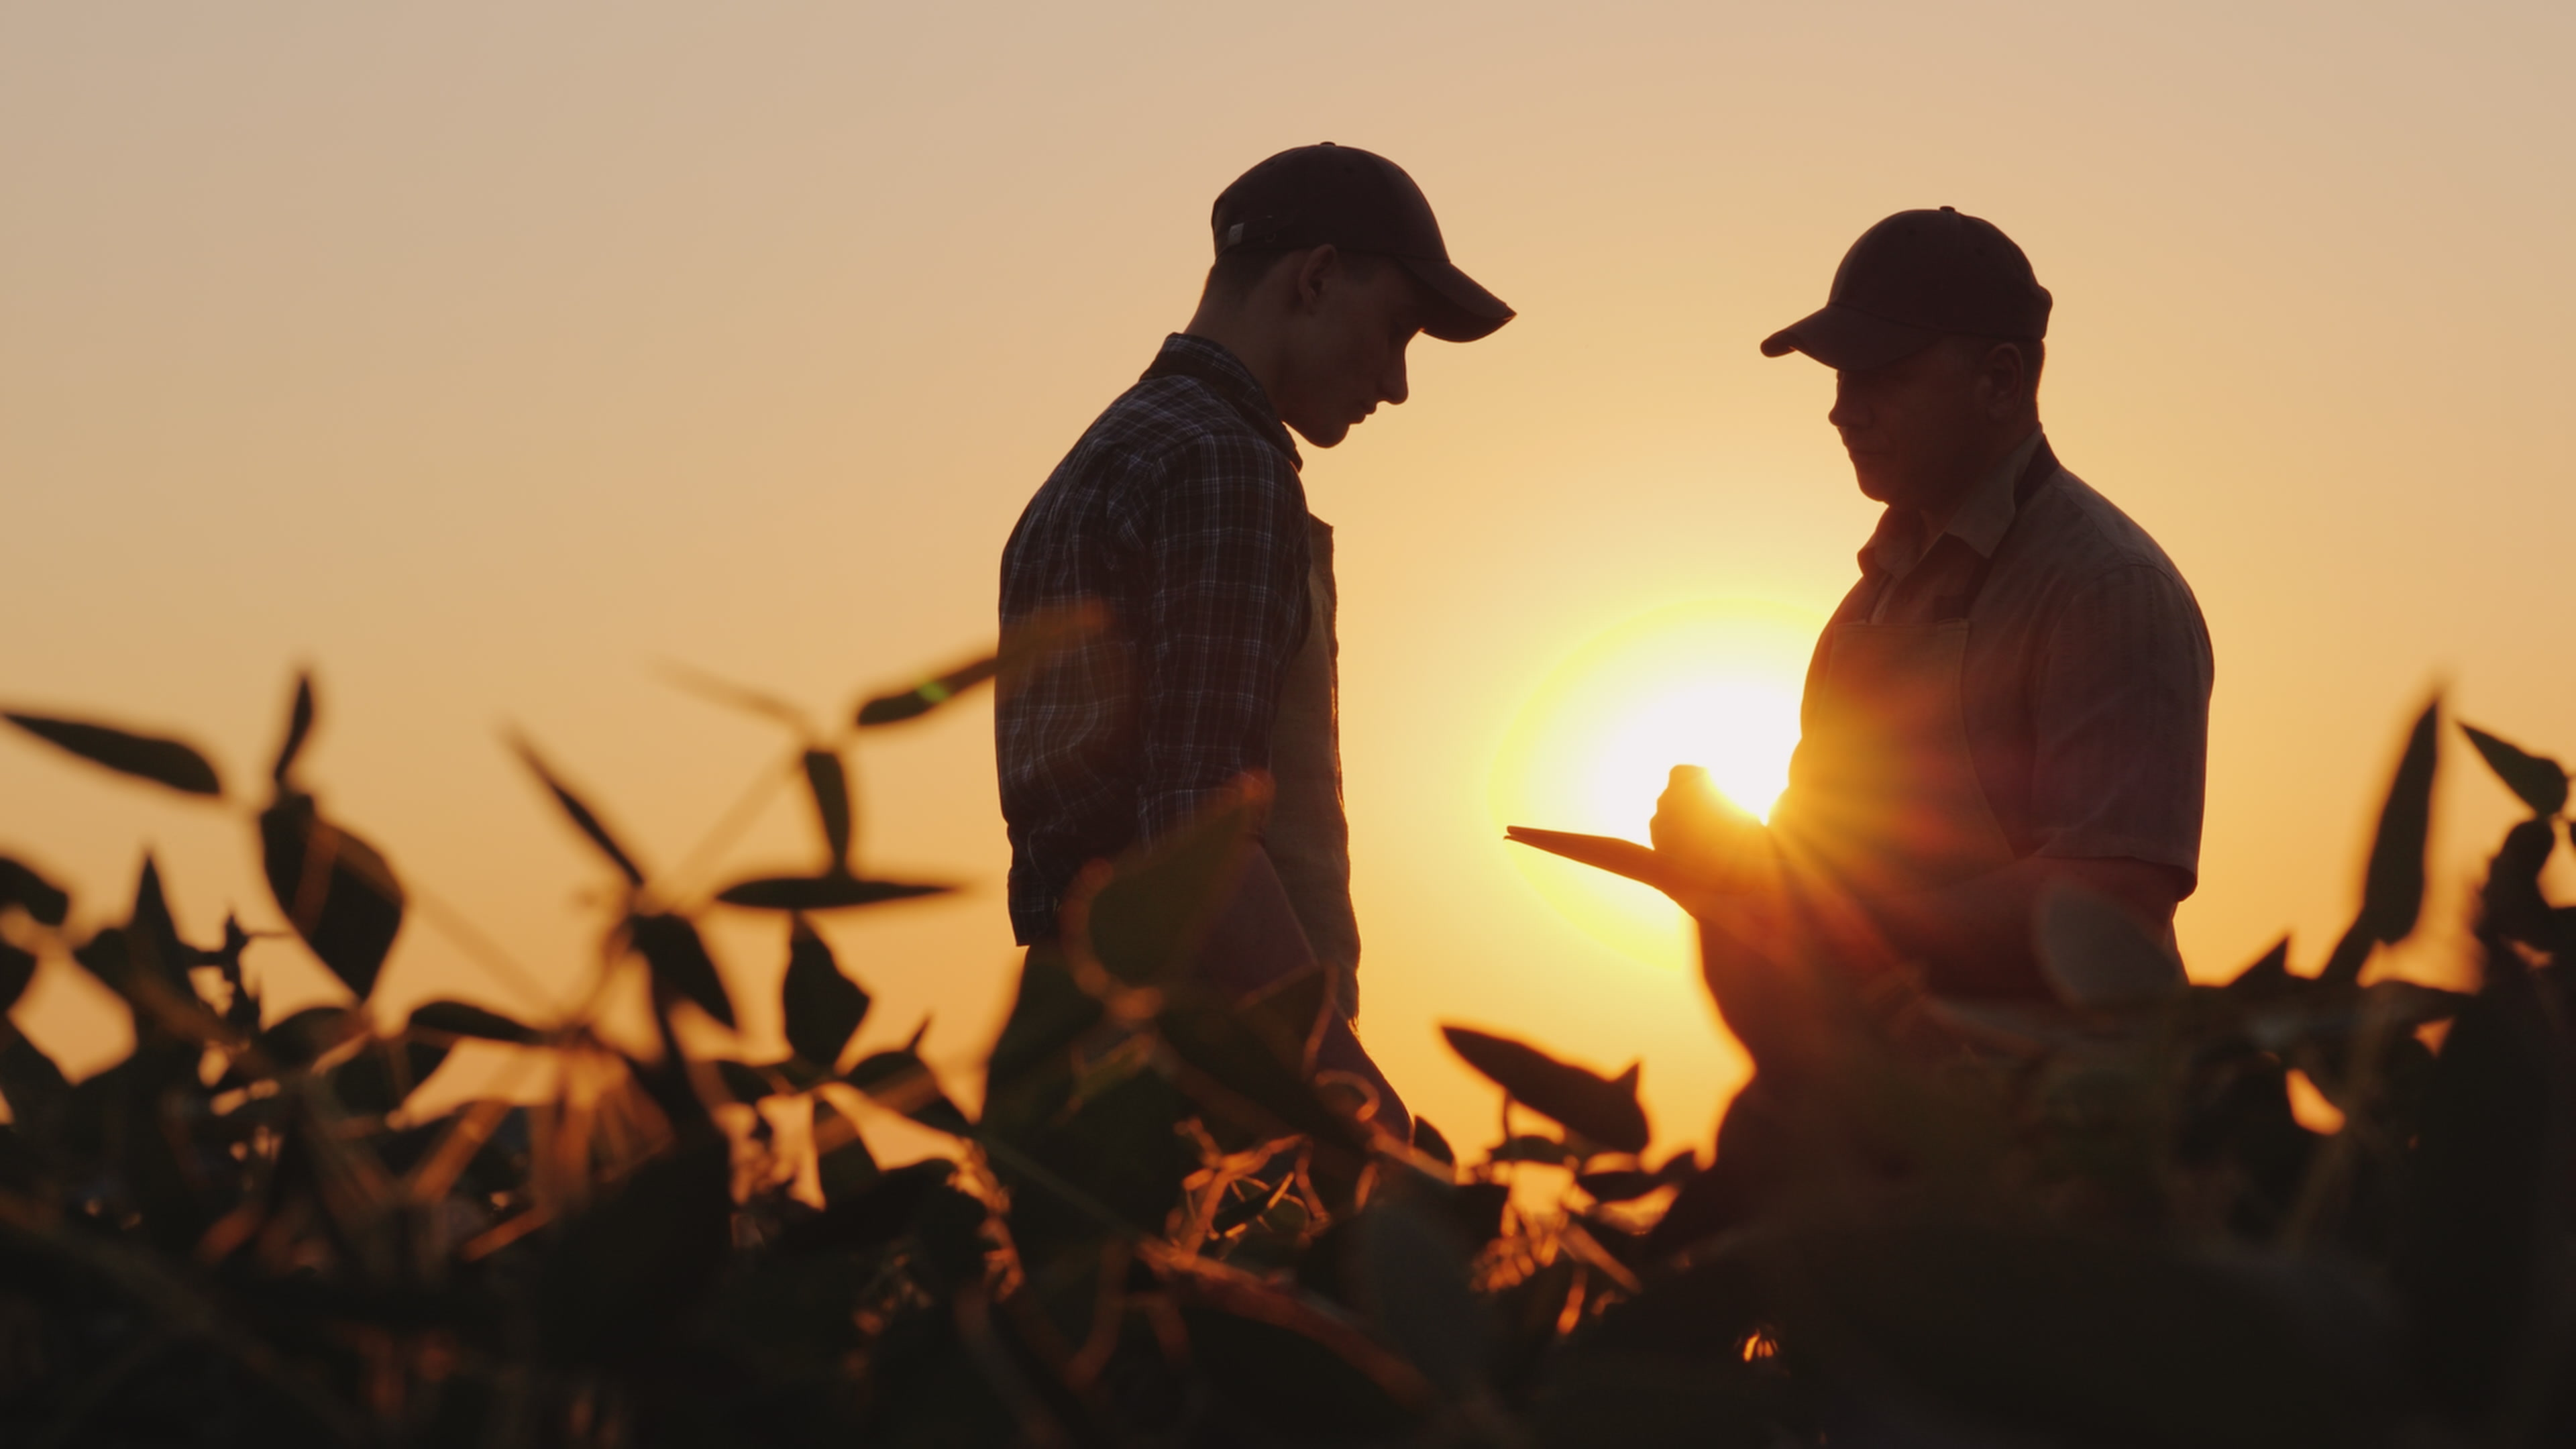 Two farmers talking in a field at sunset